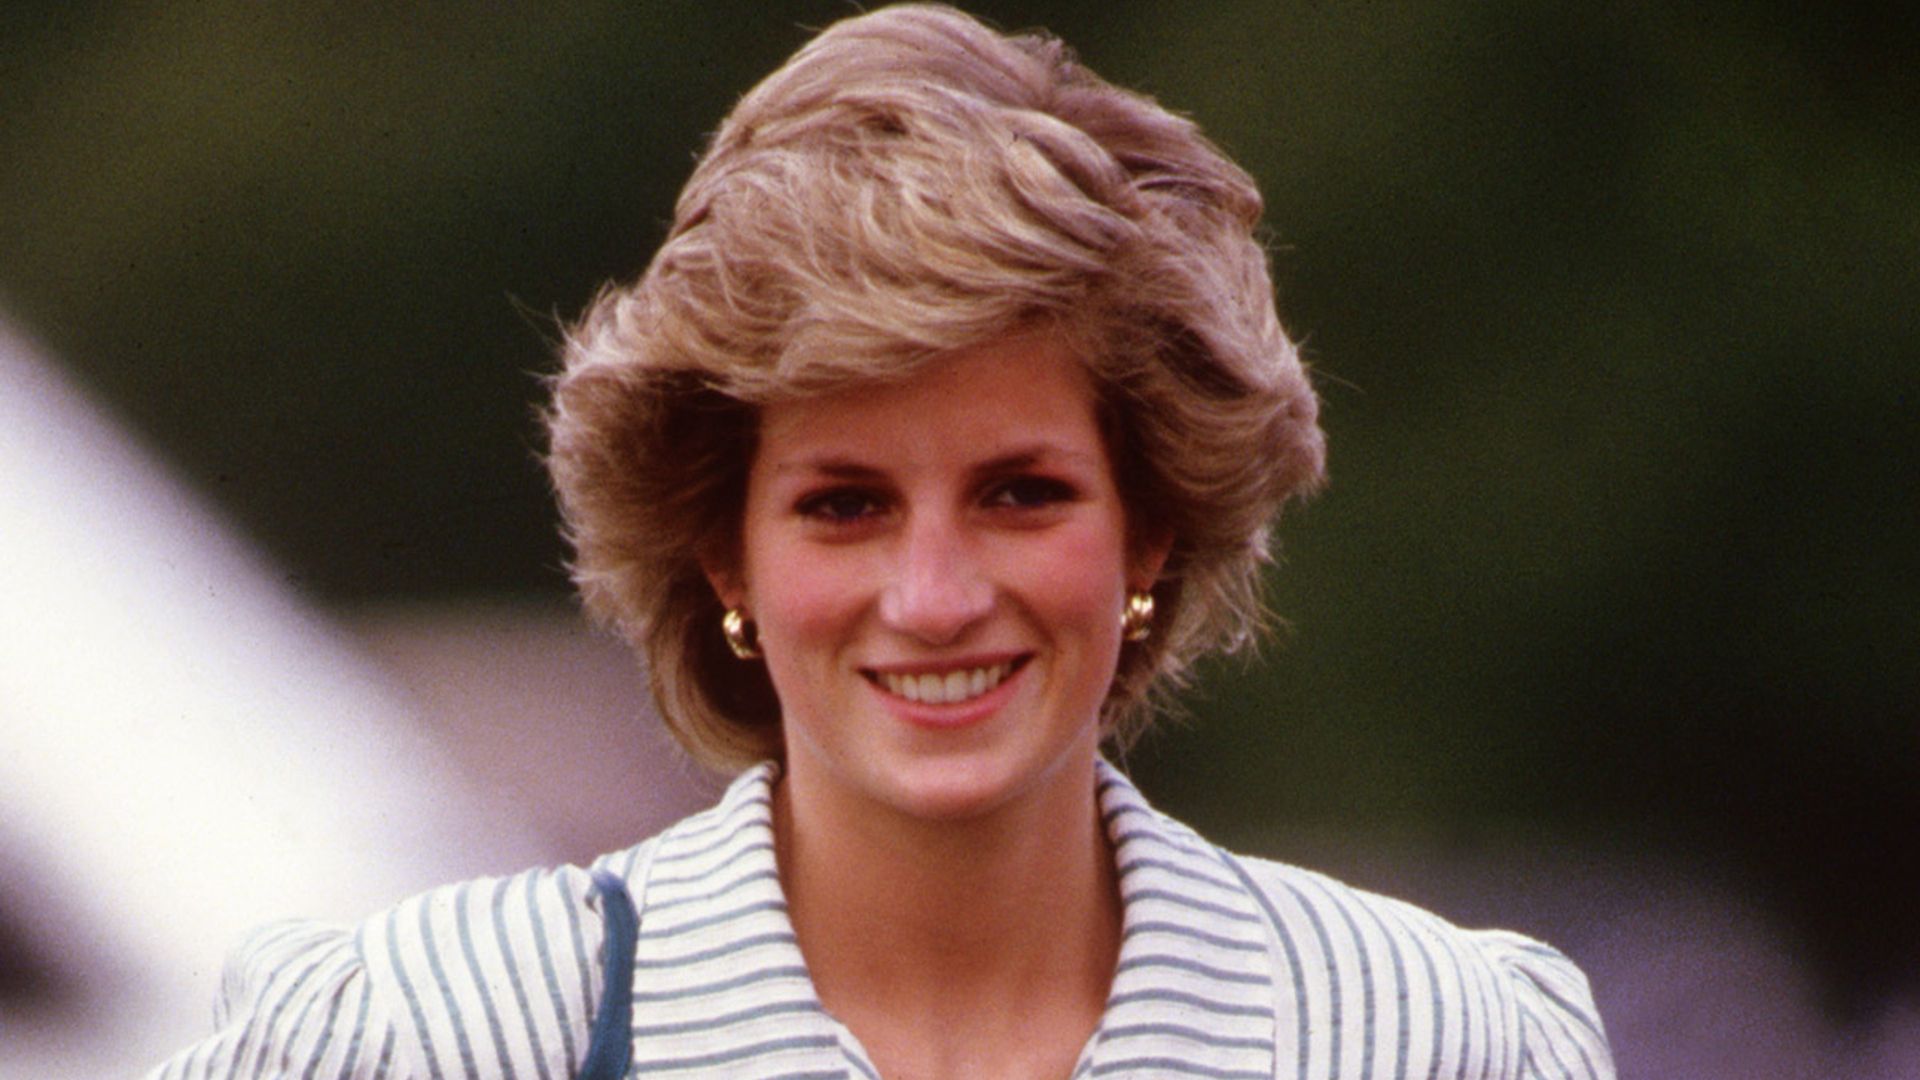 Love Princess Diana's 80s gym sweater? Primark's £14 dupe is uncanny ...